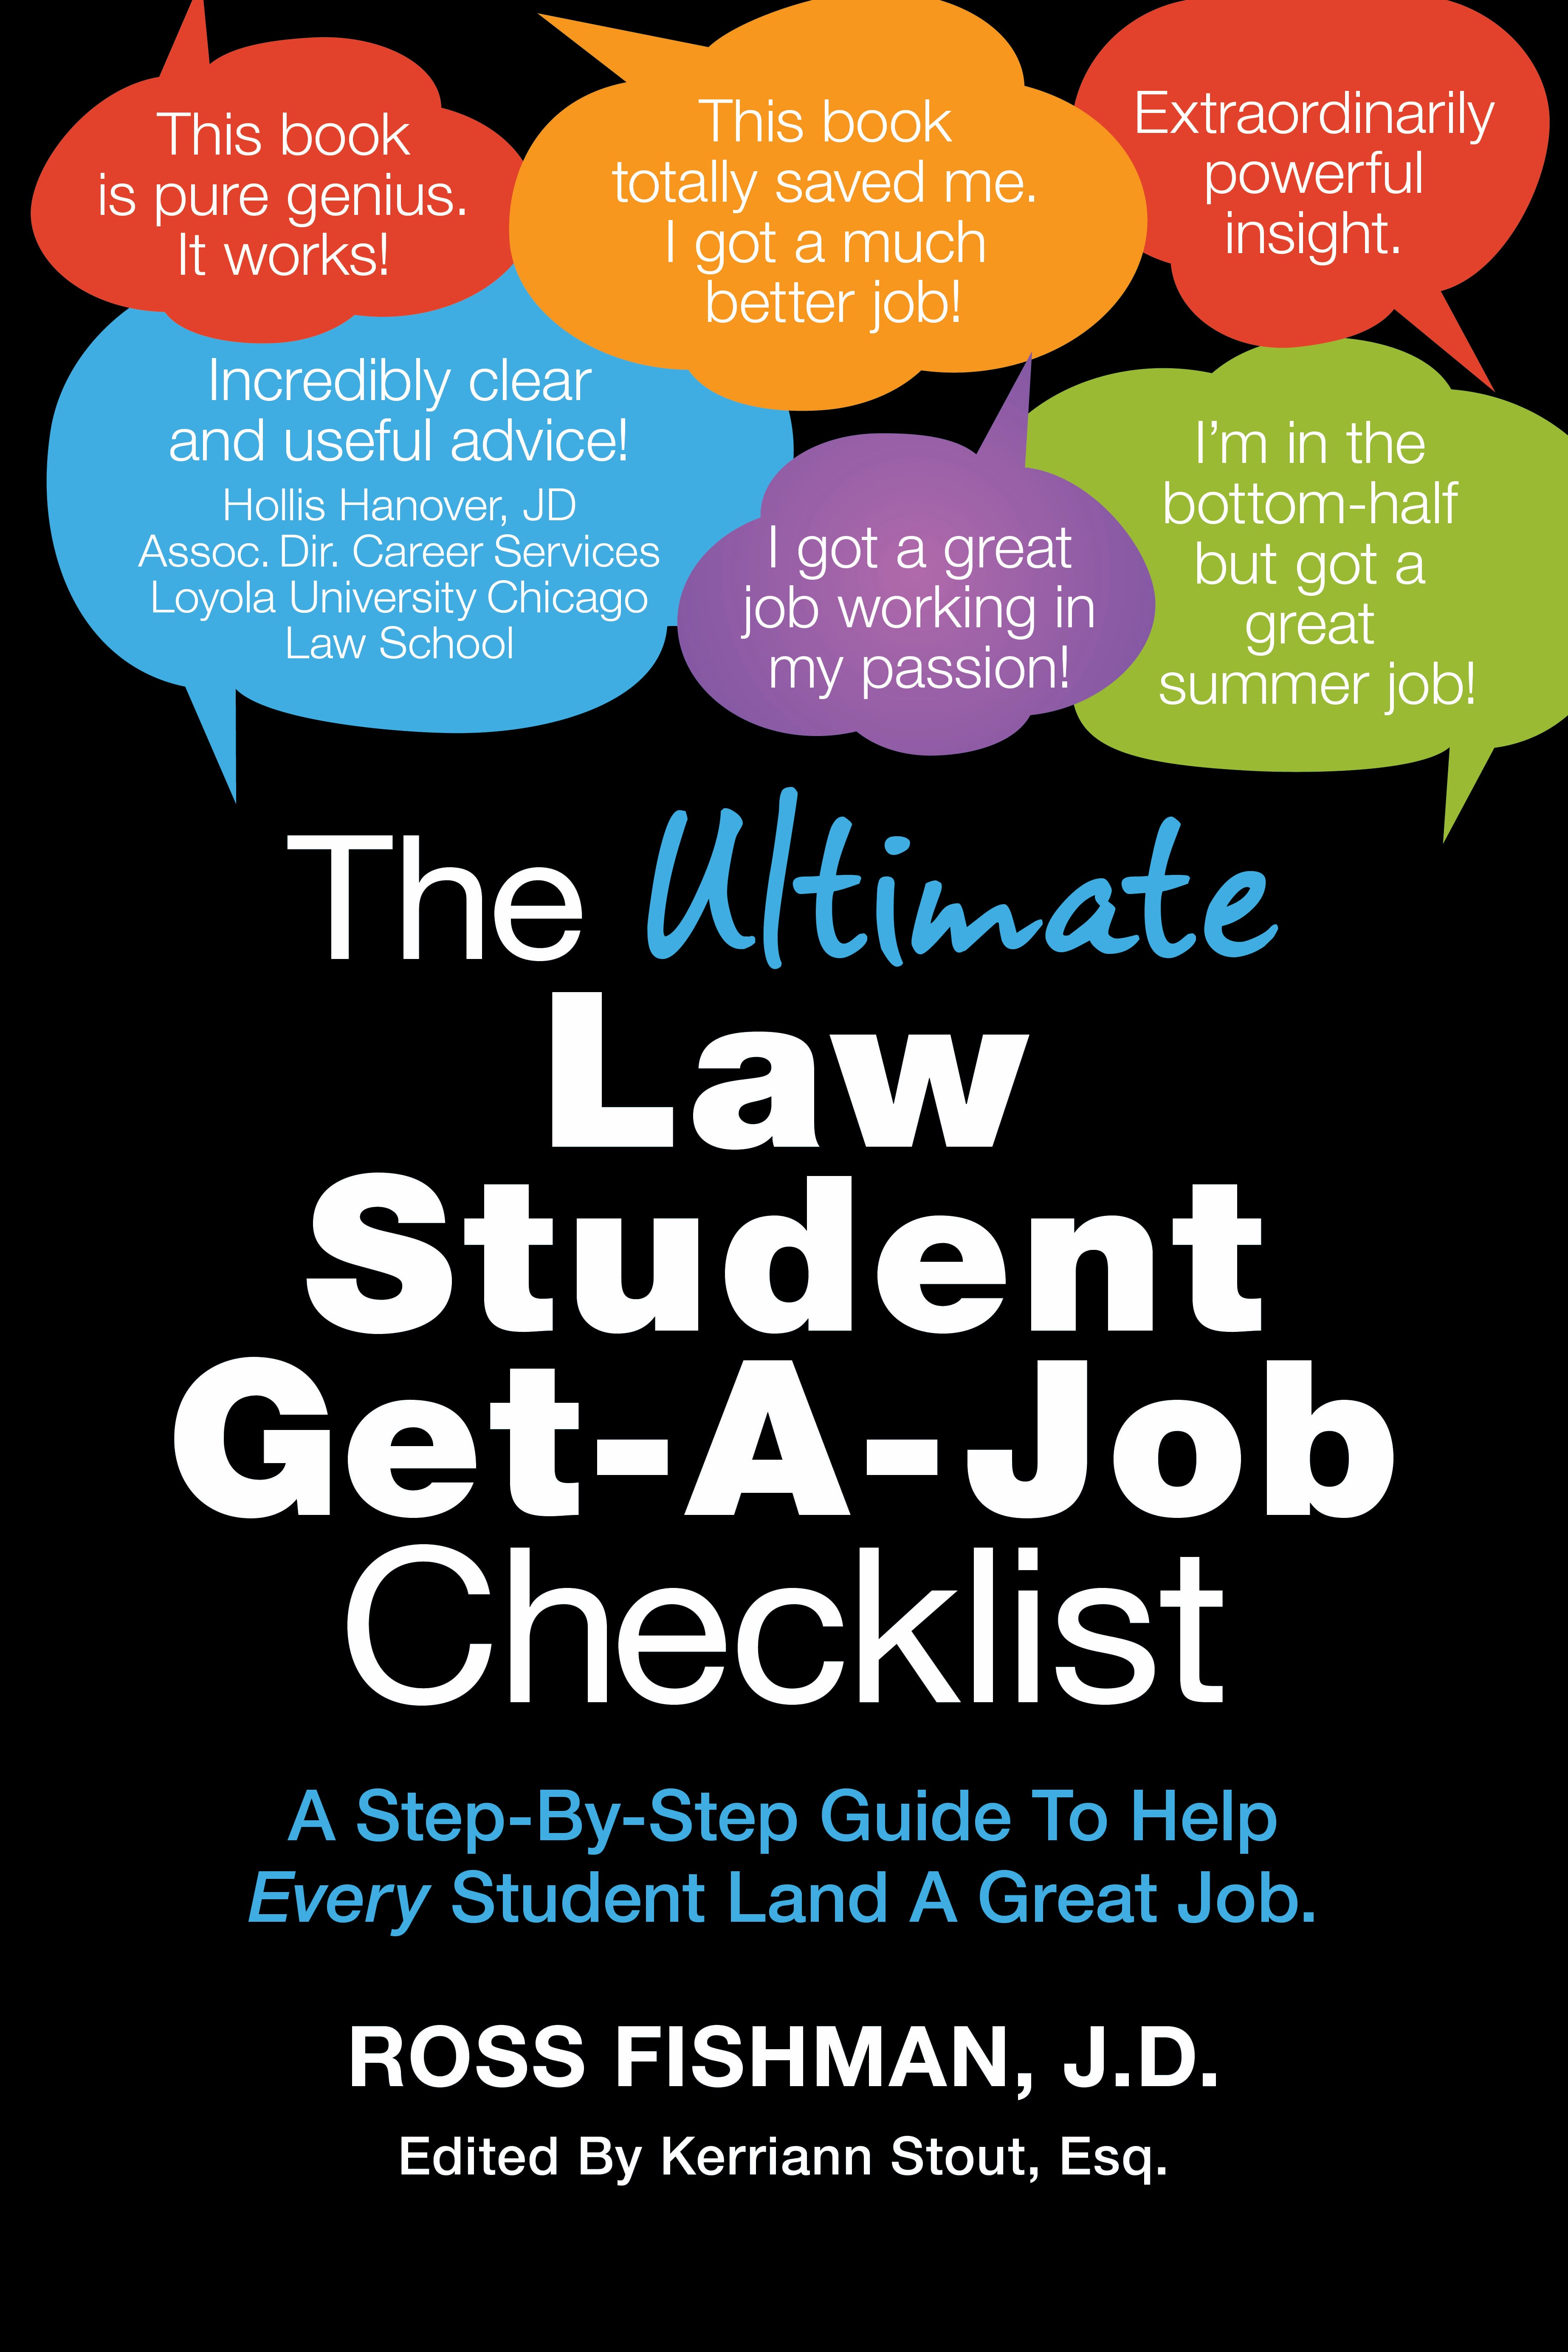 “The Ultimate LAW STUDENT Get-A-Job Checklist” is AVAILABLE!